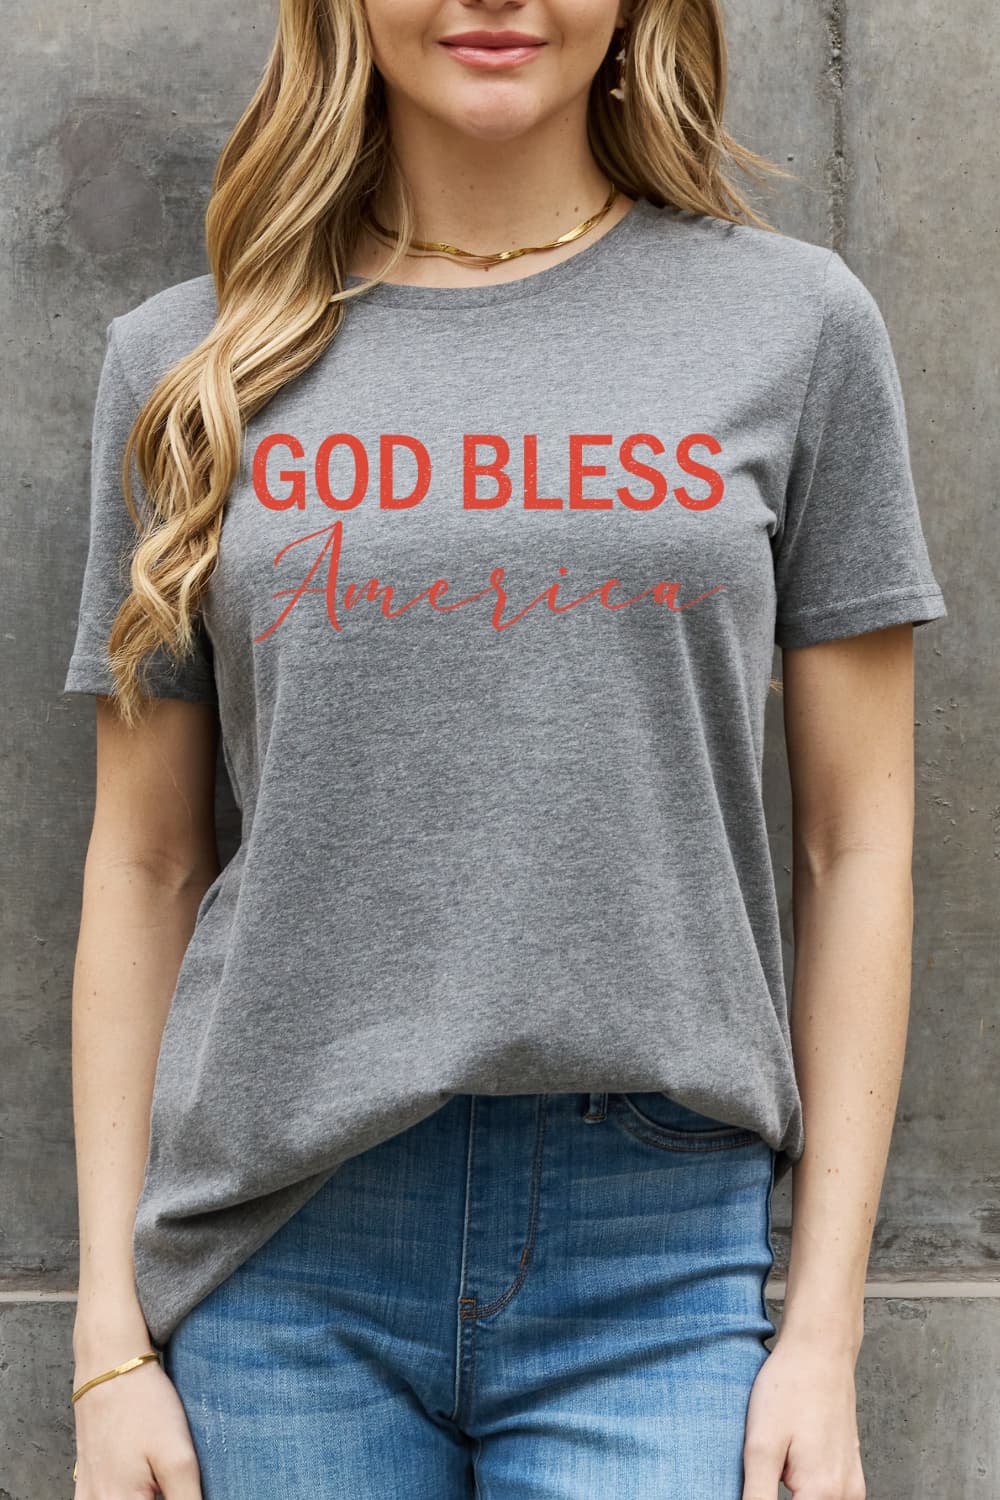 Simply Love GOD BLESS AMERICA Graphic Cotton Tee BLUE ZONE PLANET